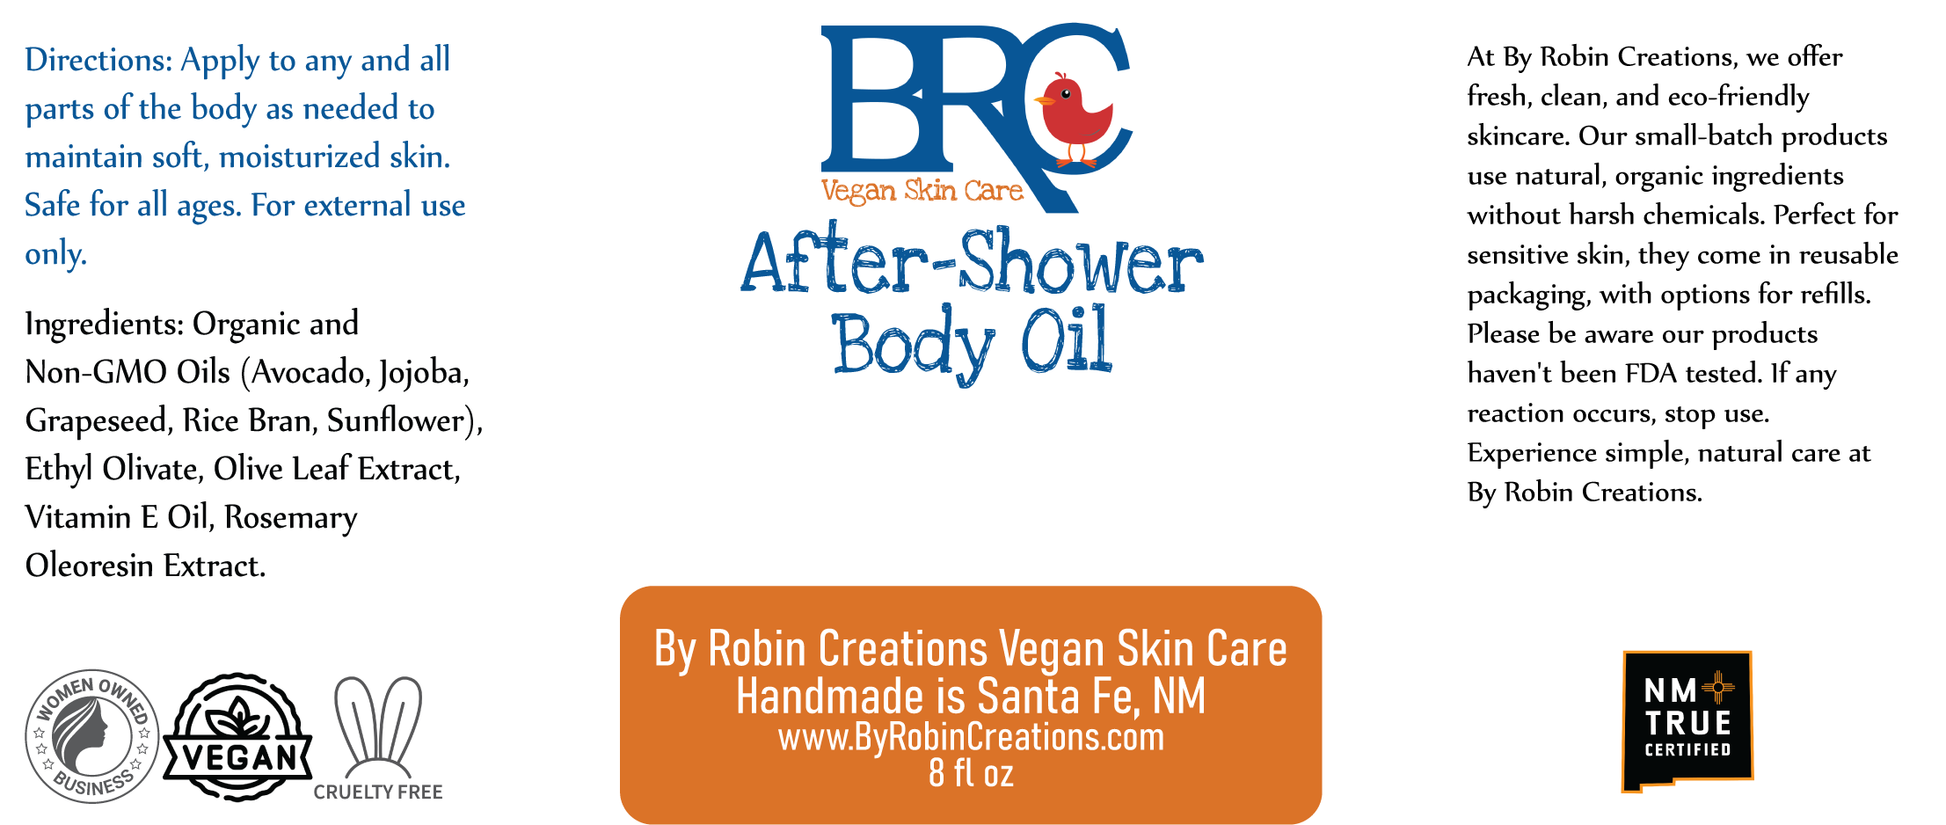 After-Shower Silky Body Oil | By Robin Creations 